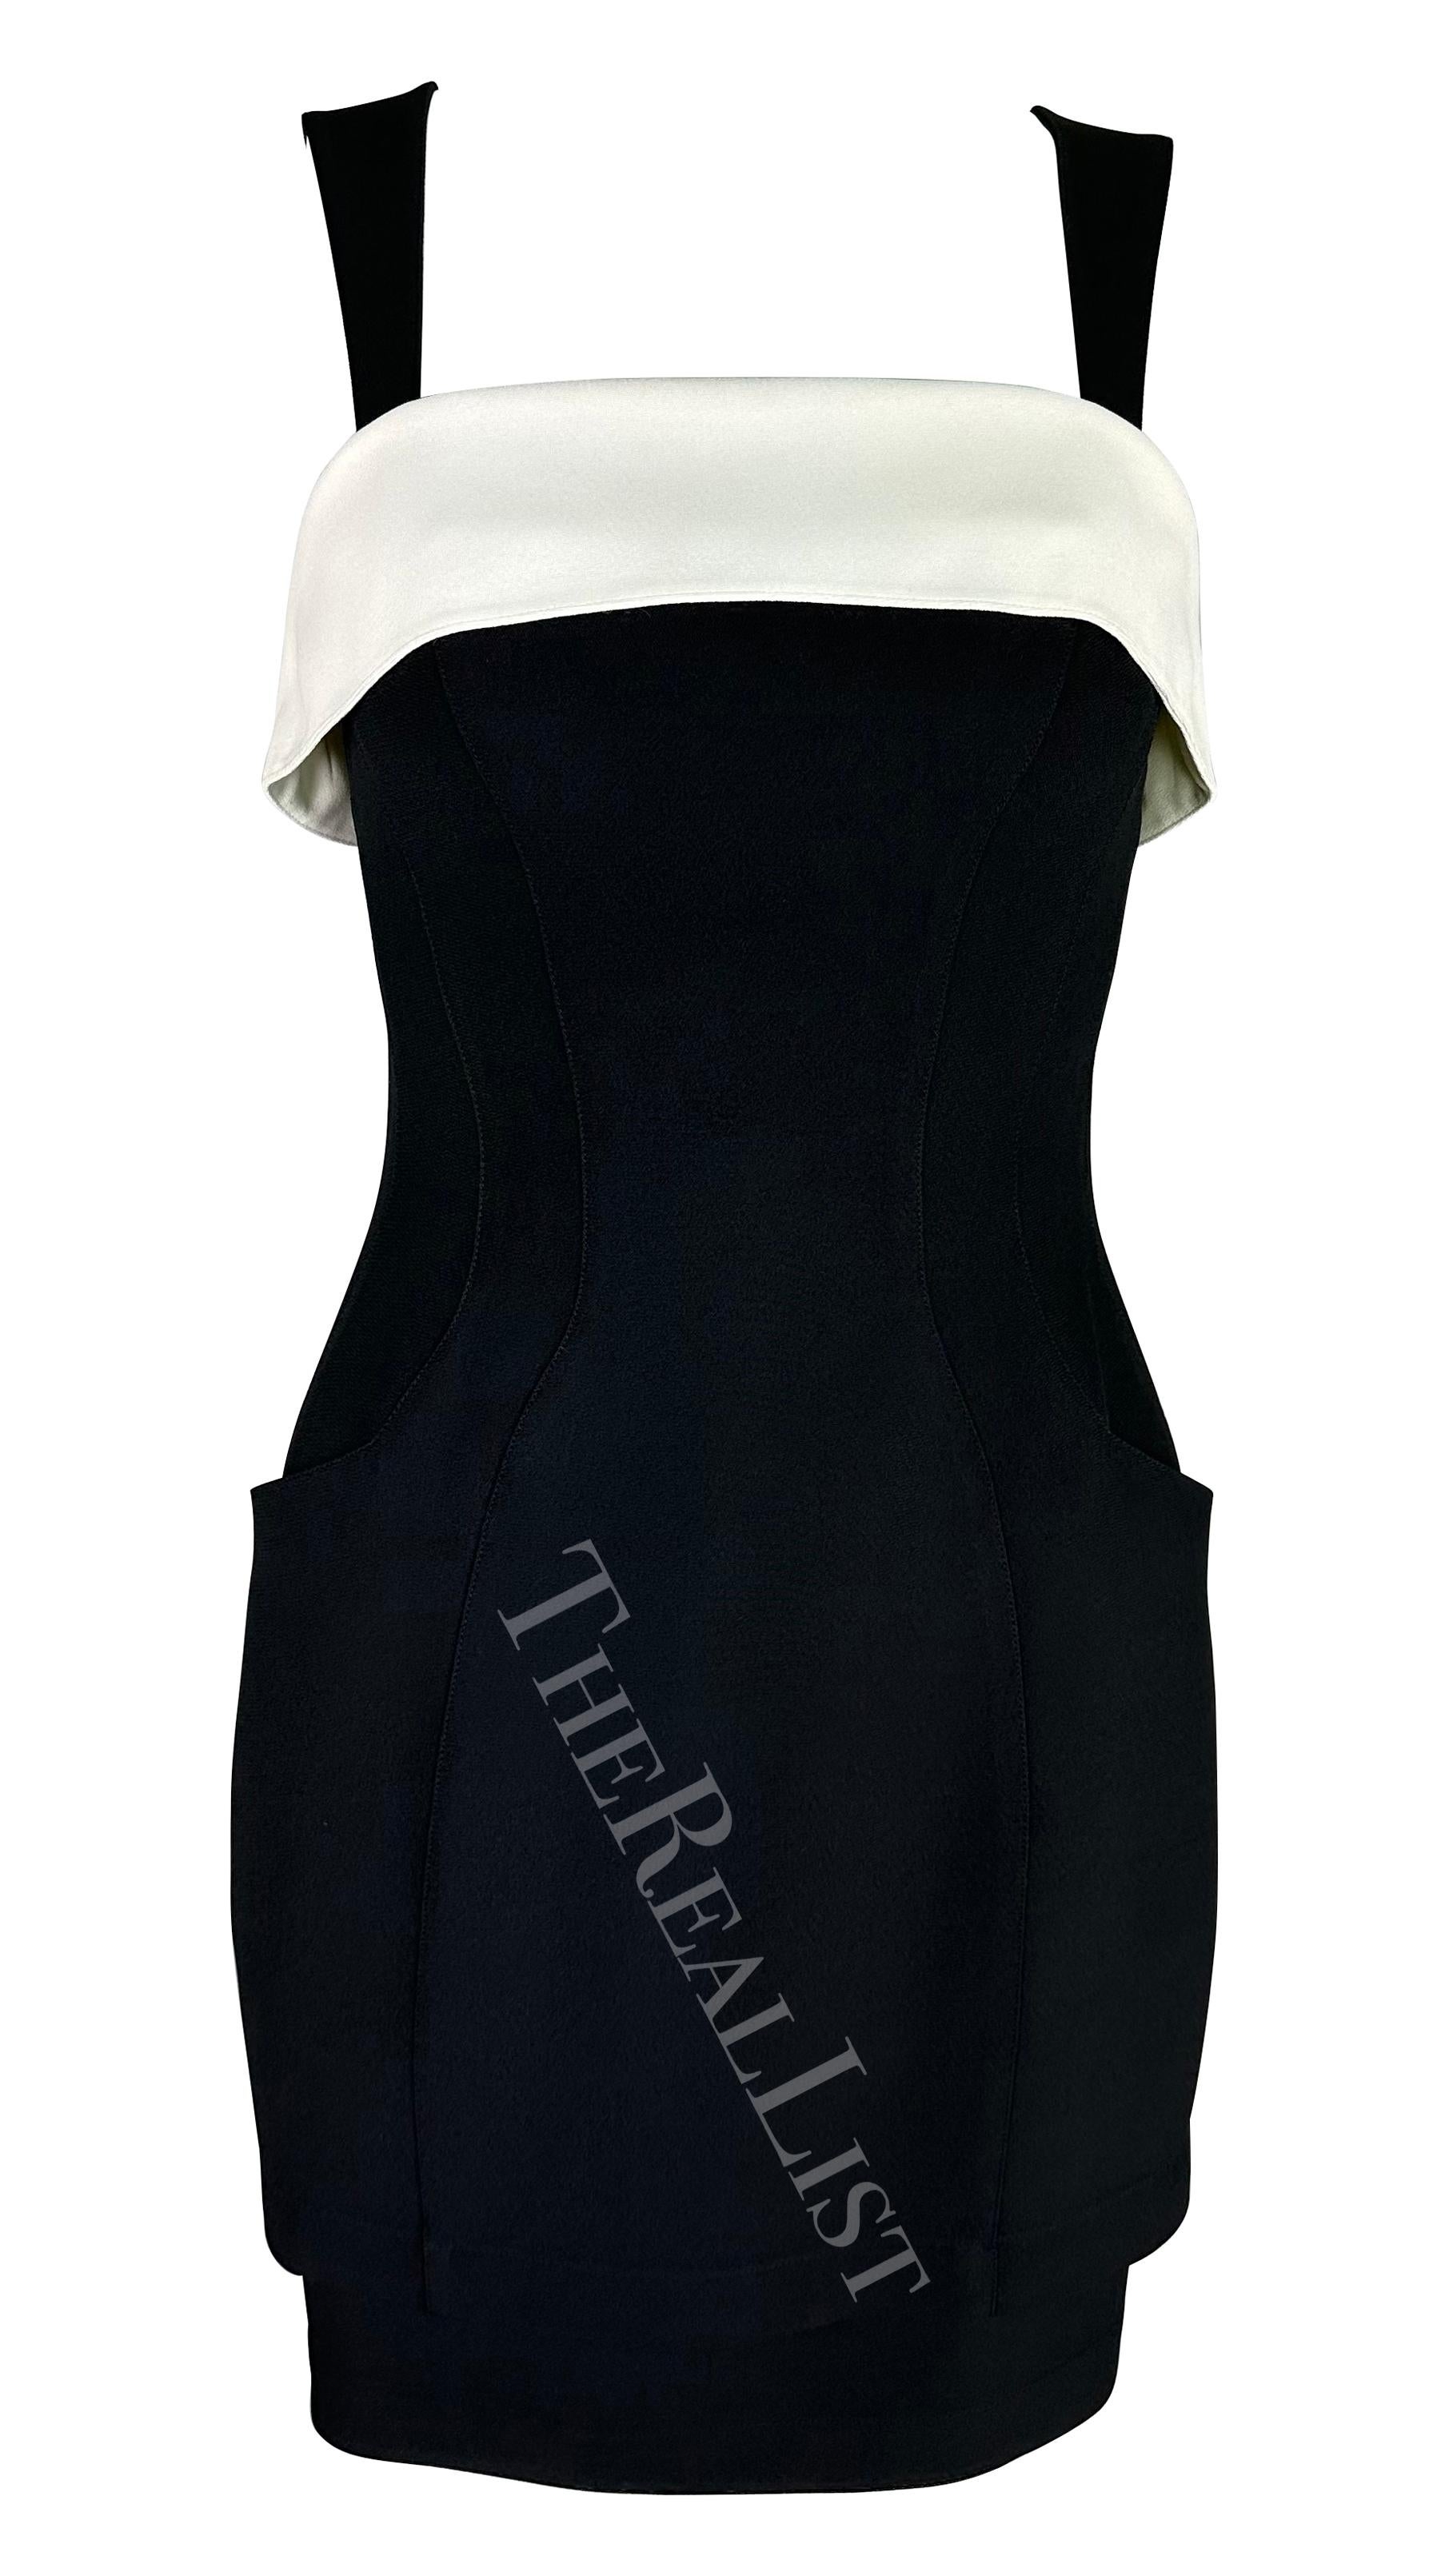 S/S 1996 Thierry Mugler Runway Black White Trim Cinched Mini Dress In Good Condition For Sale In West Hollywood, CA